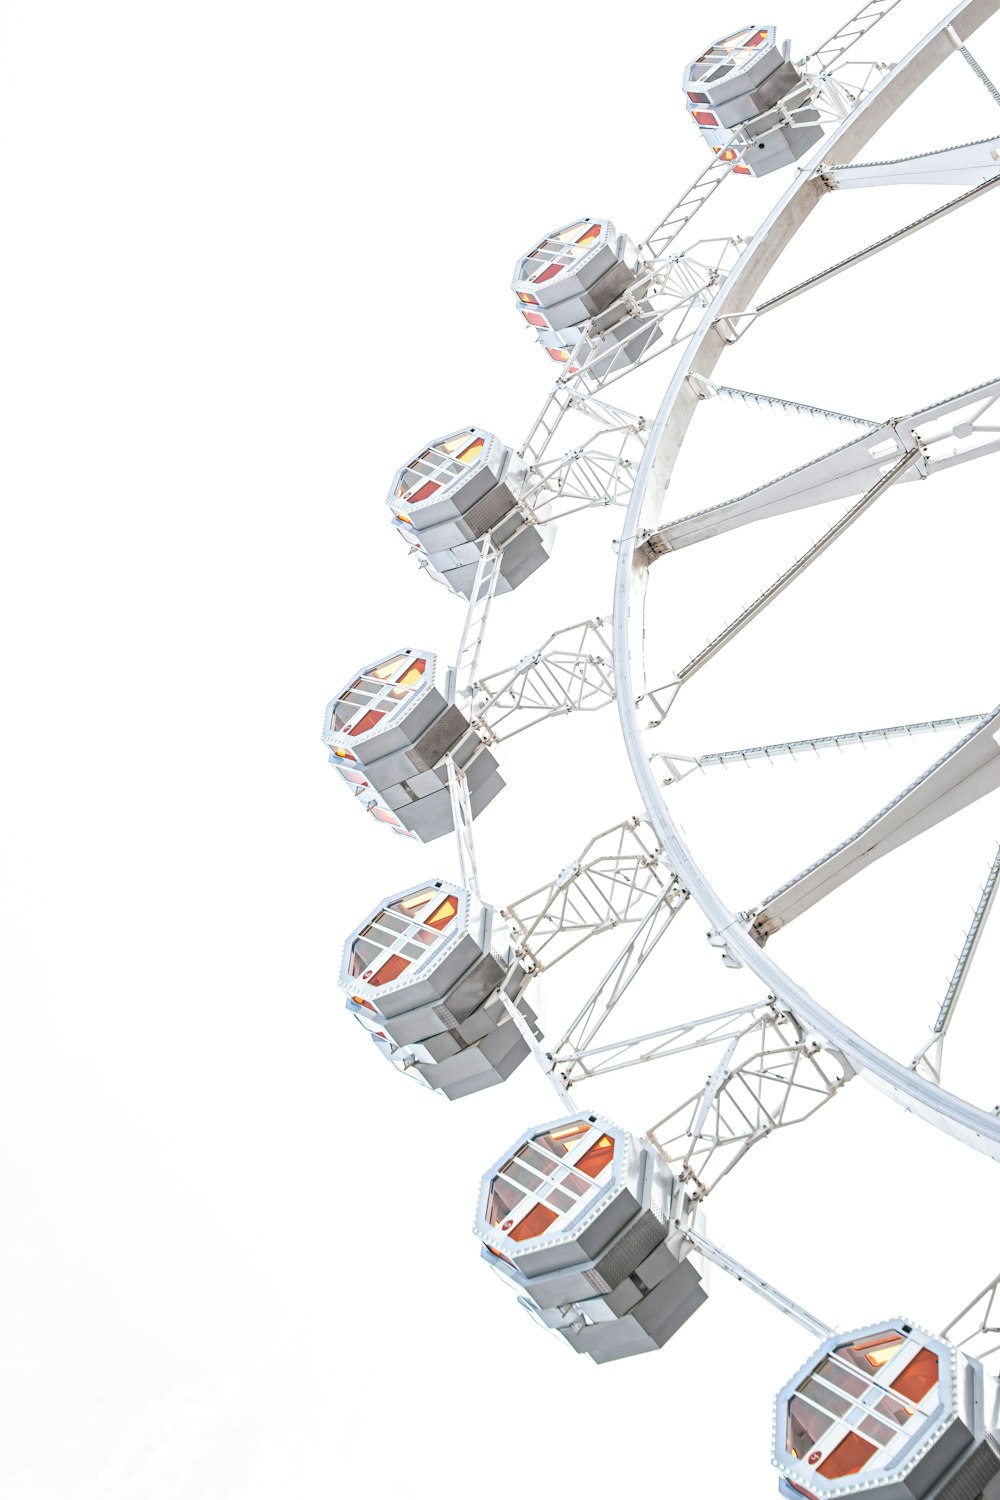 white and red ferris wheel